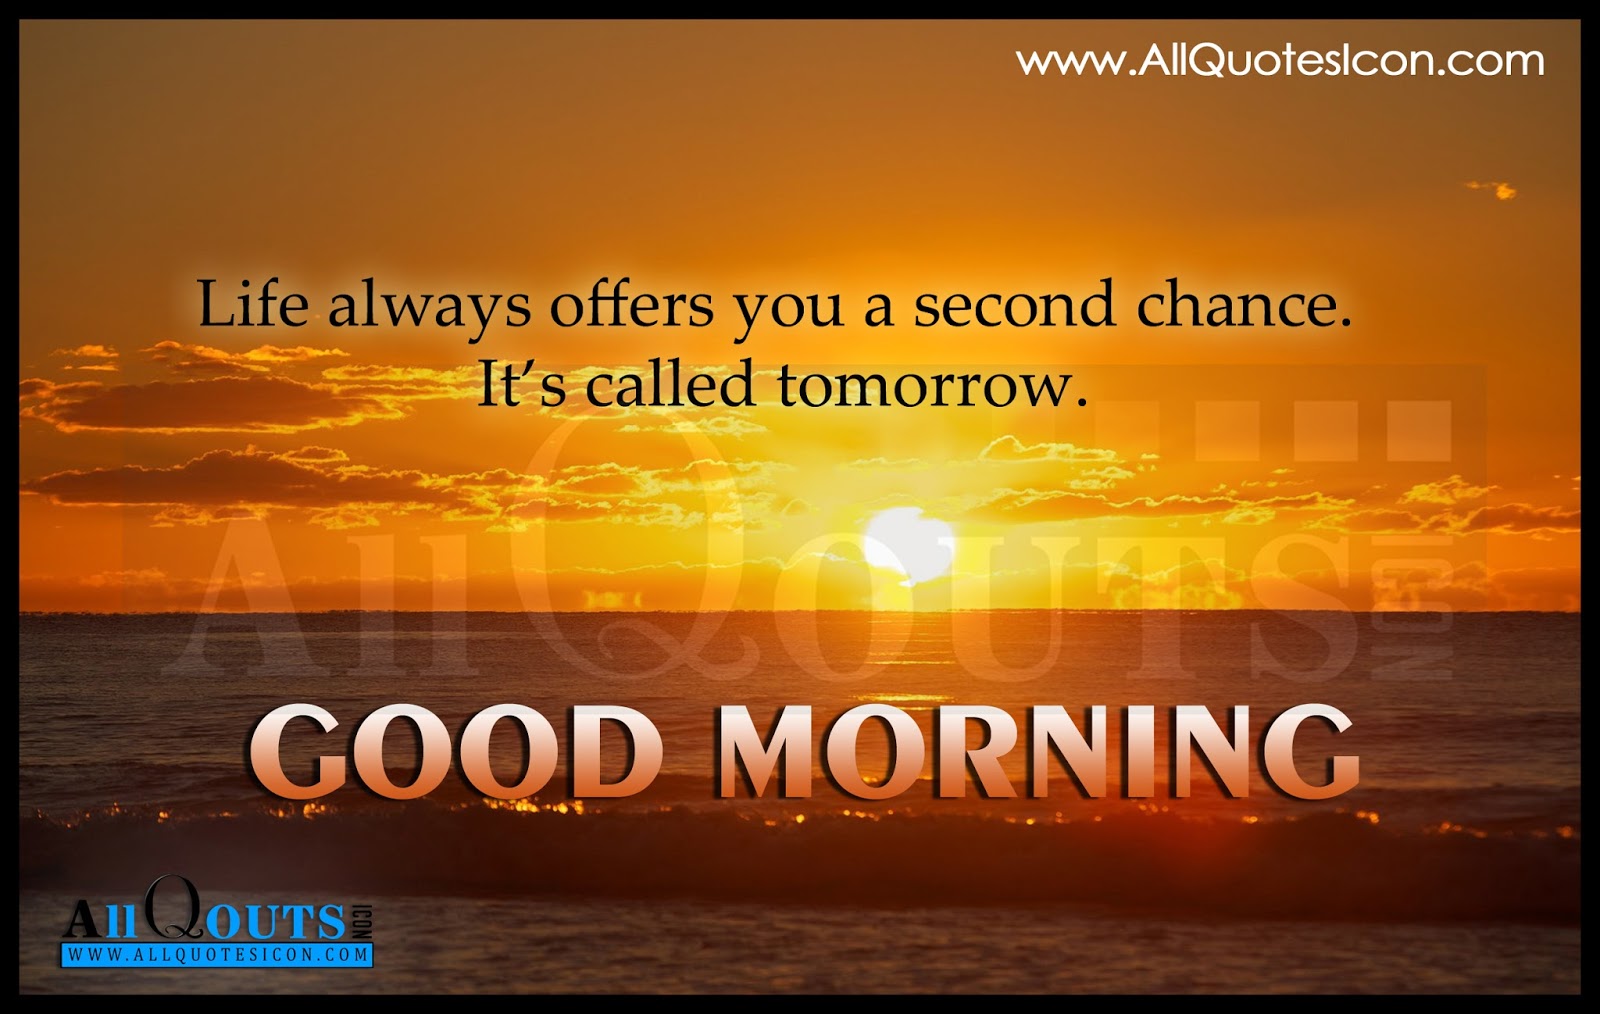 Good Morning English quotes images pictures wallpapers photos